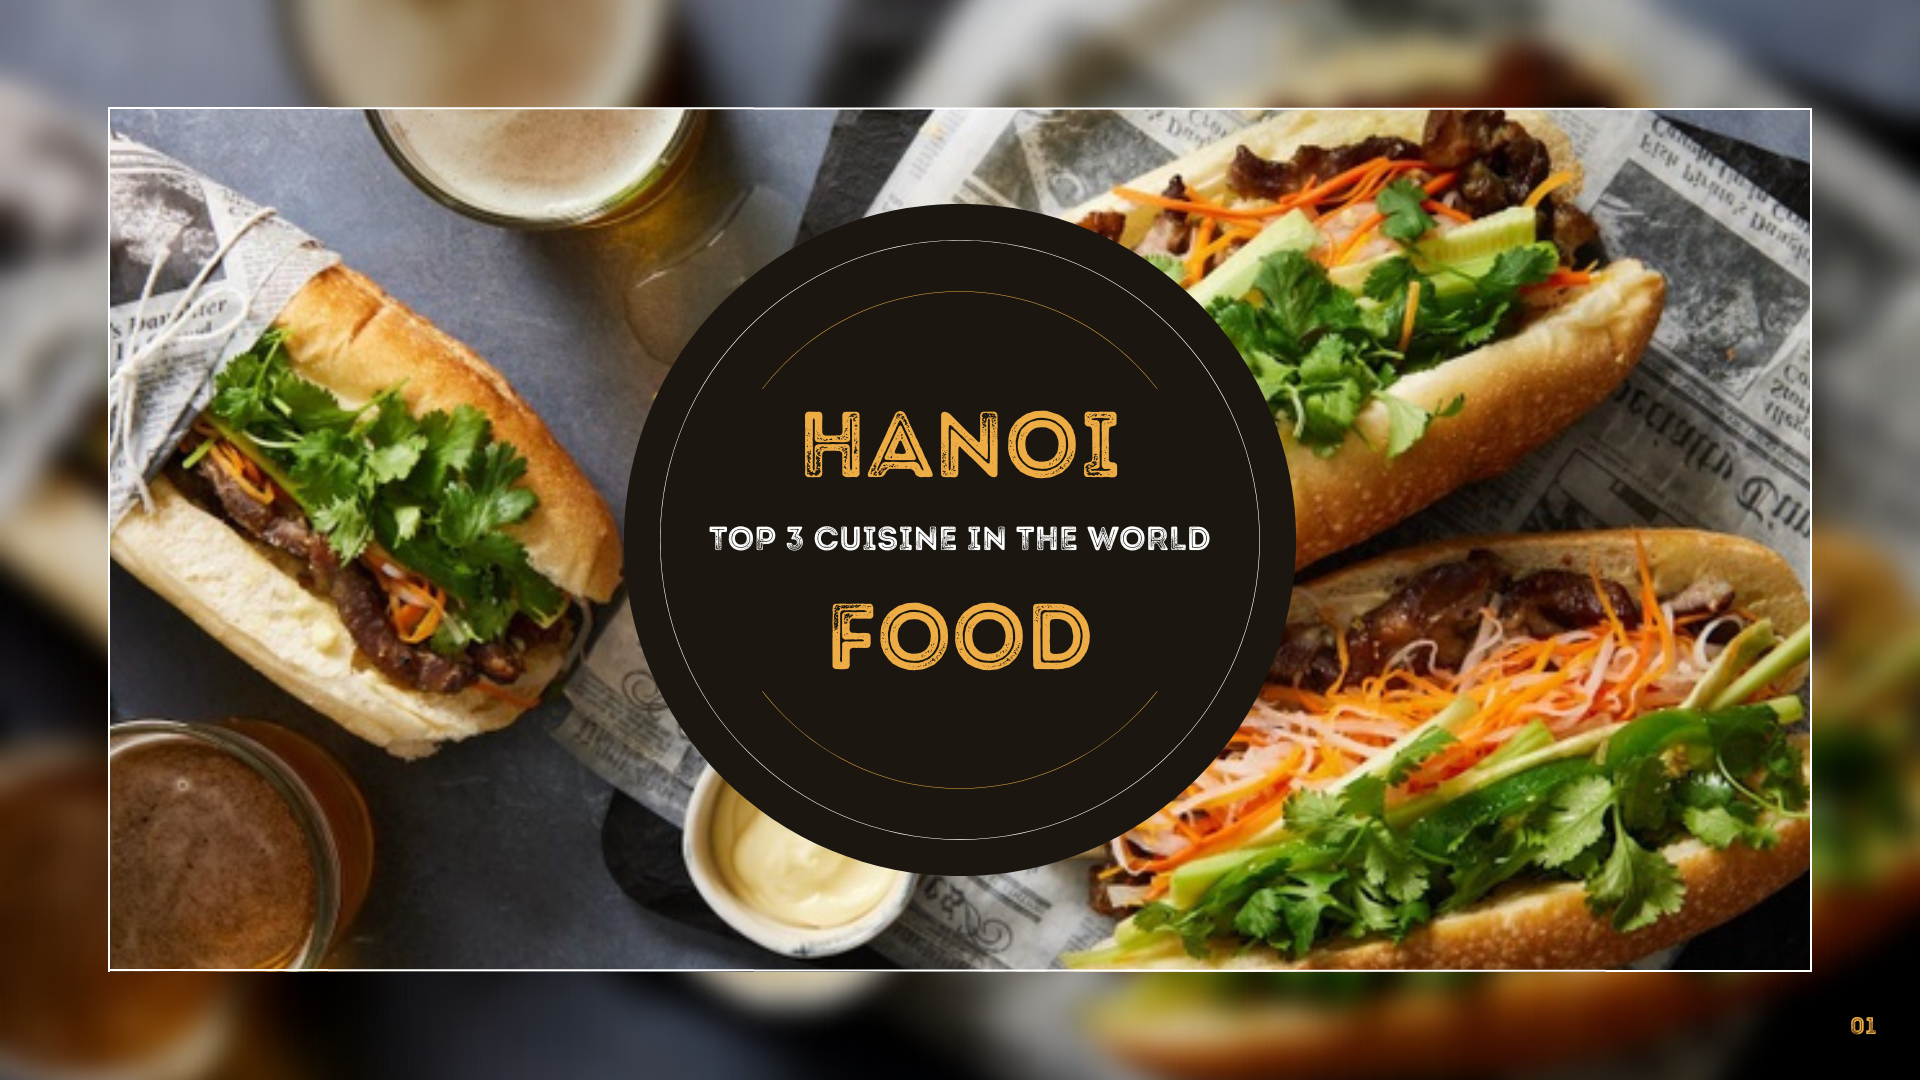 Hanoi ranked top 3 cuisine in the world in 2023